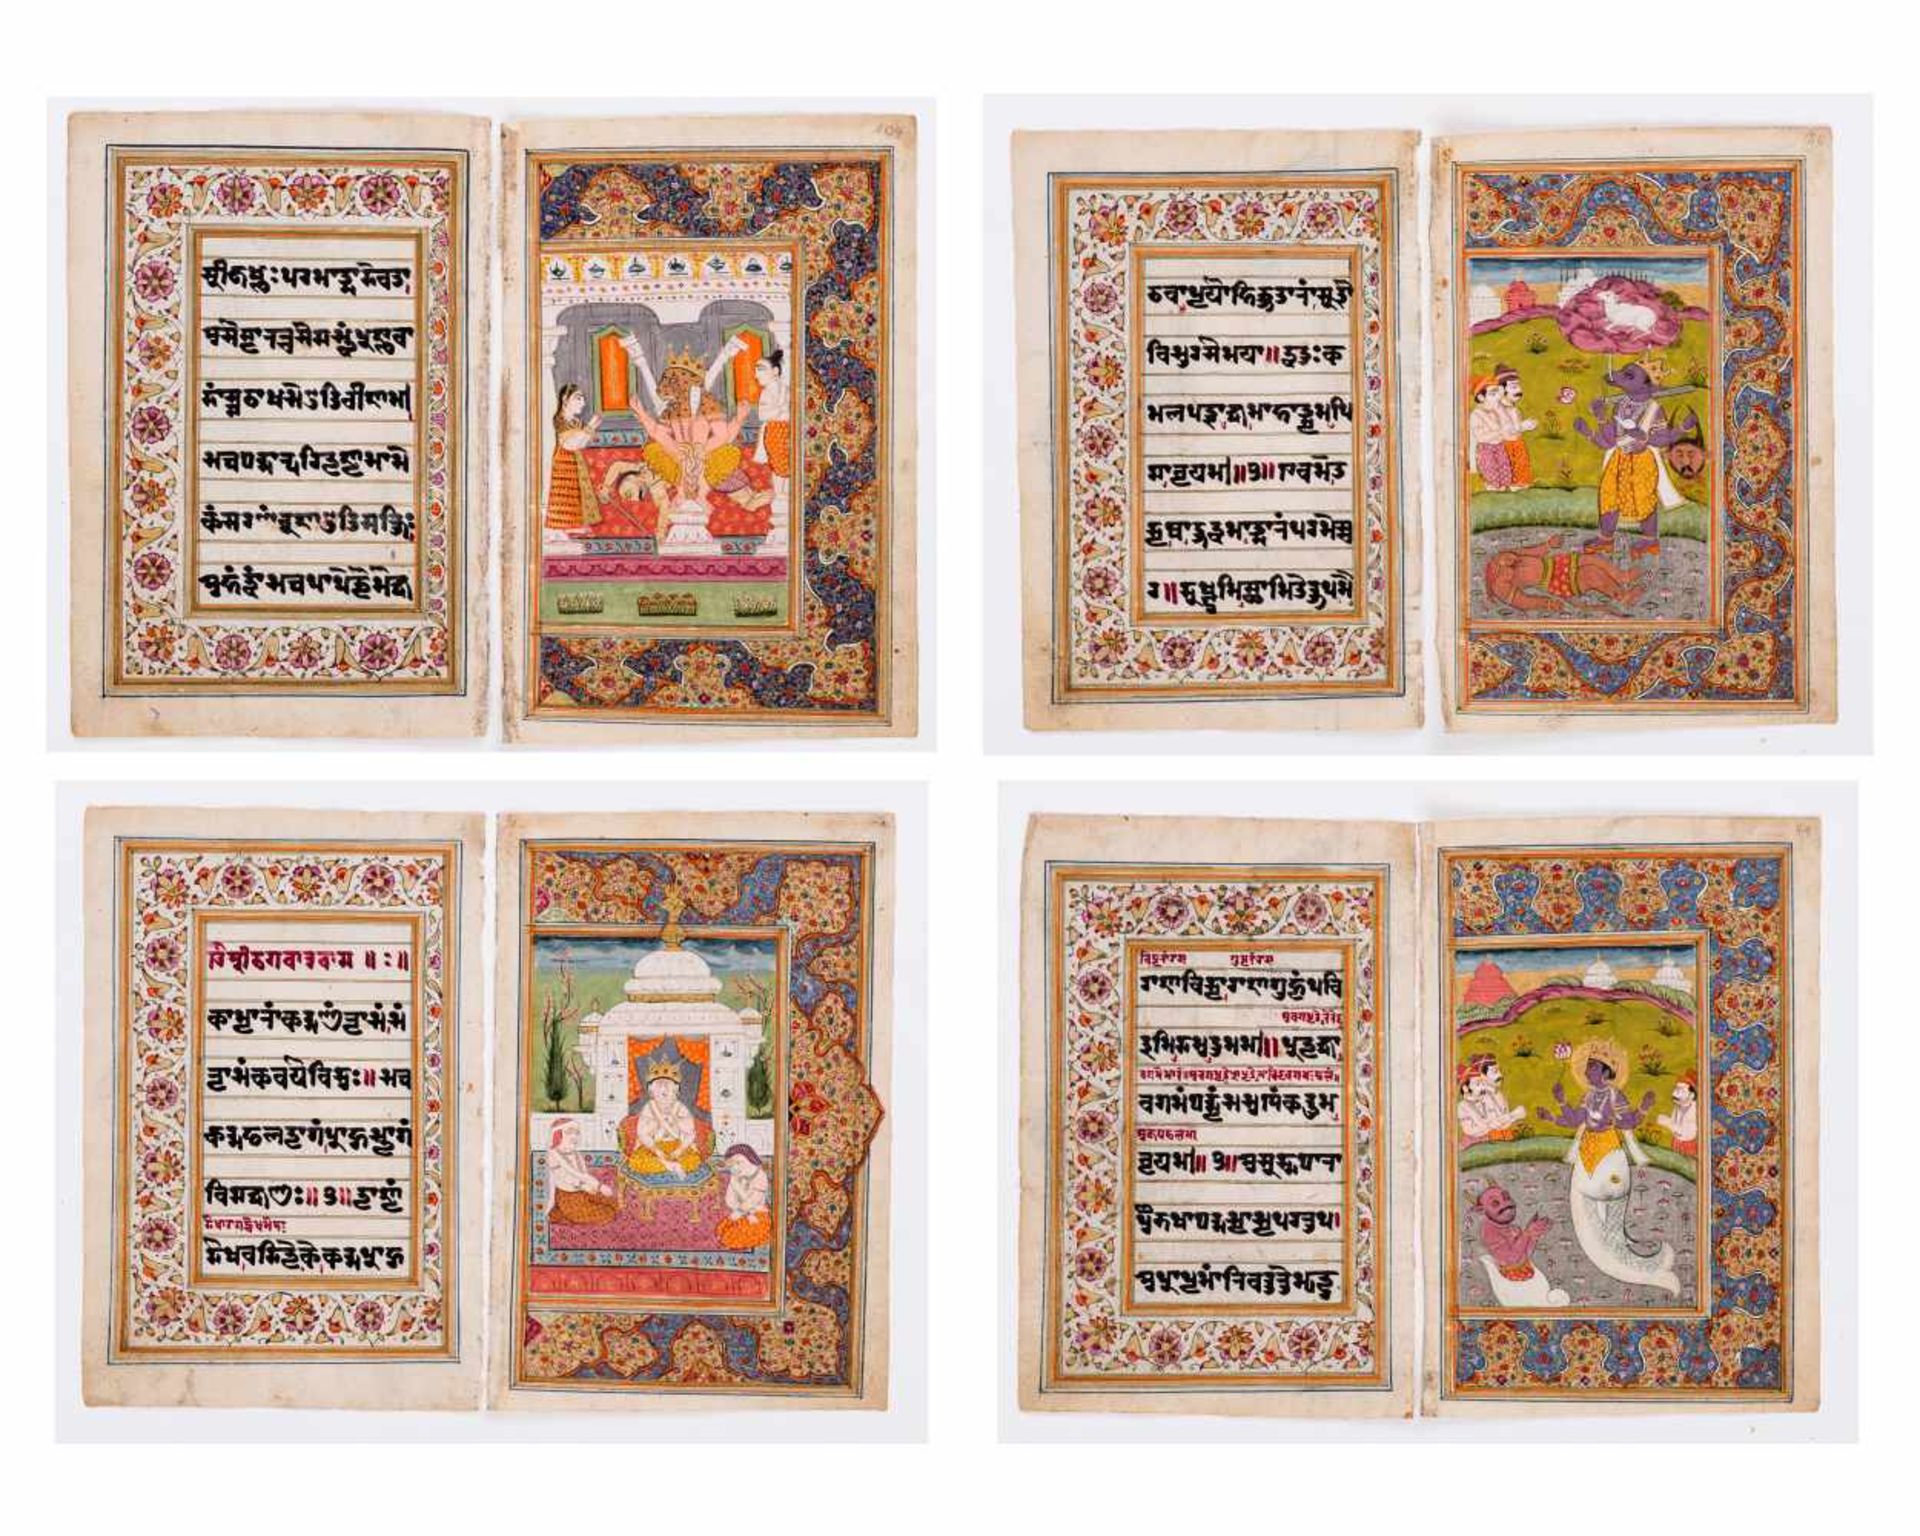 EIGHT MINIATURE PAINTINGS DEPICTING DEITIES - INDIA, 19th CENTURYMiniature painting with colors